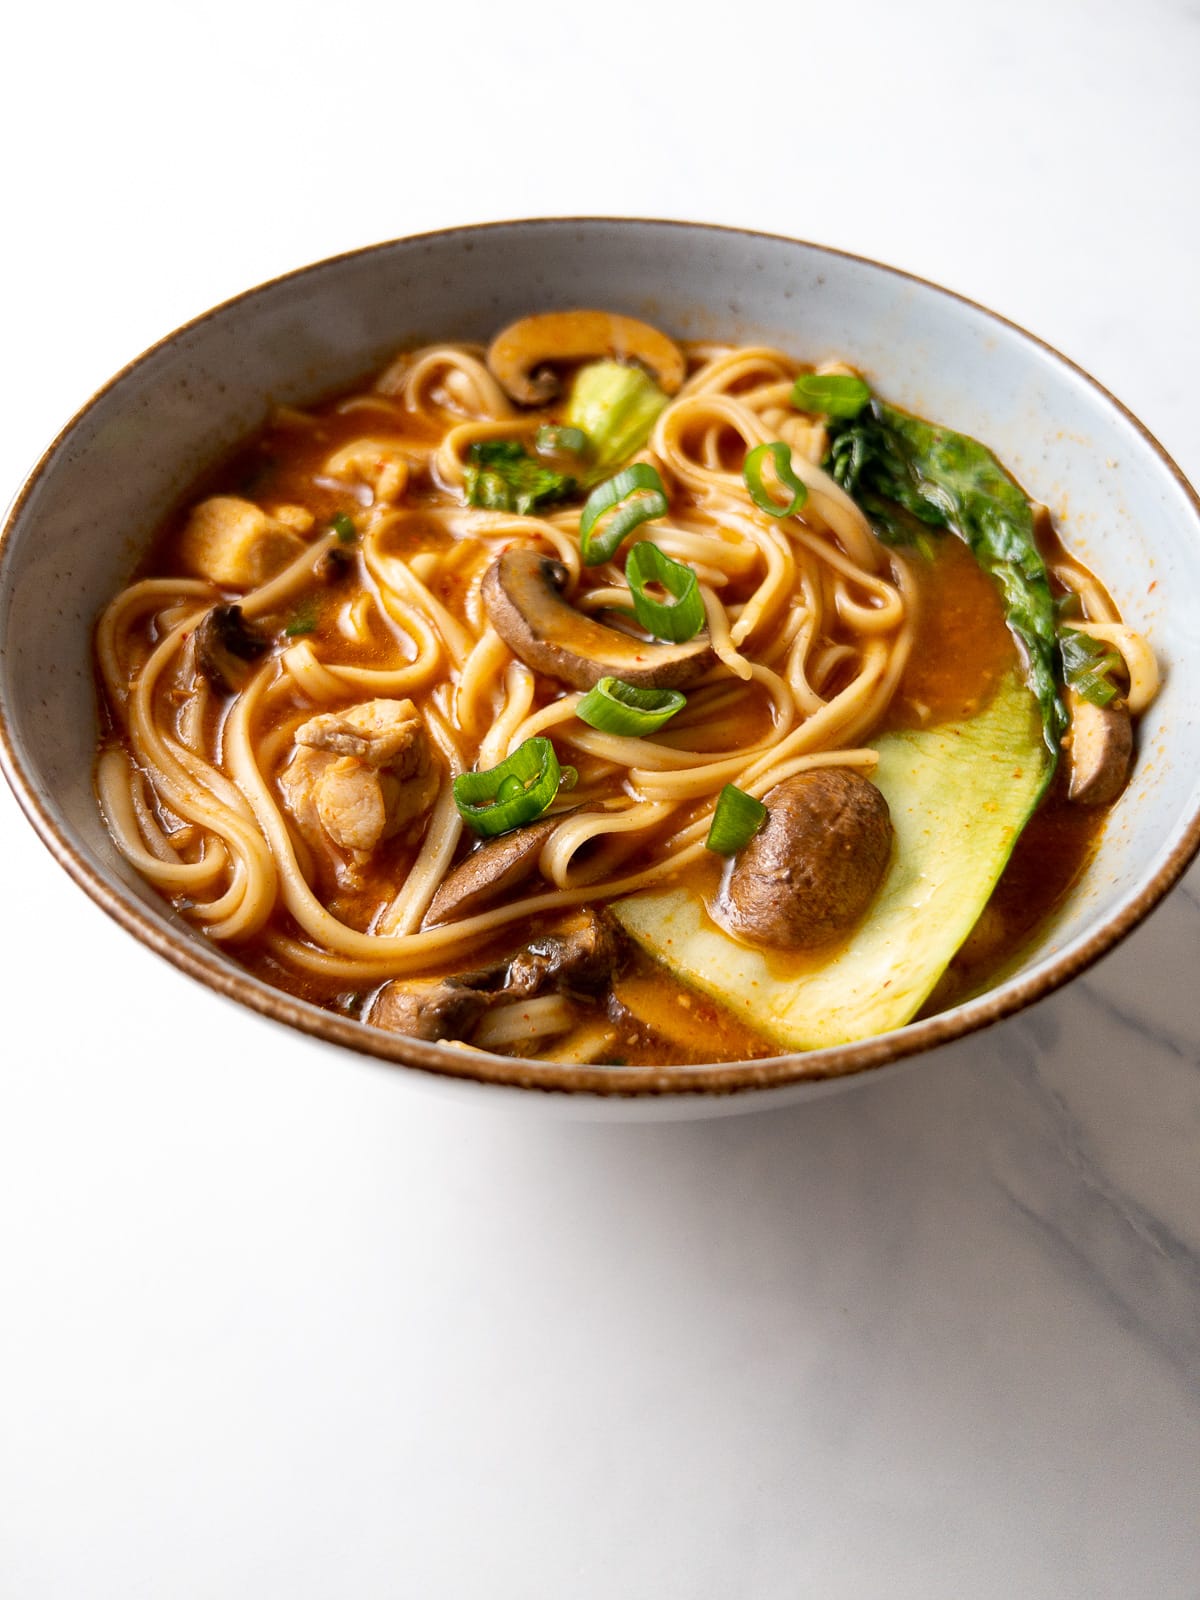 spicy chicken udon noodle soup garnished with green onions in a bowl